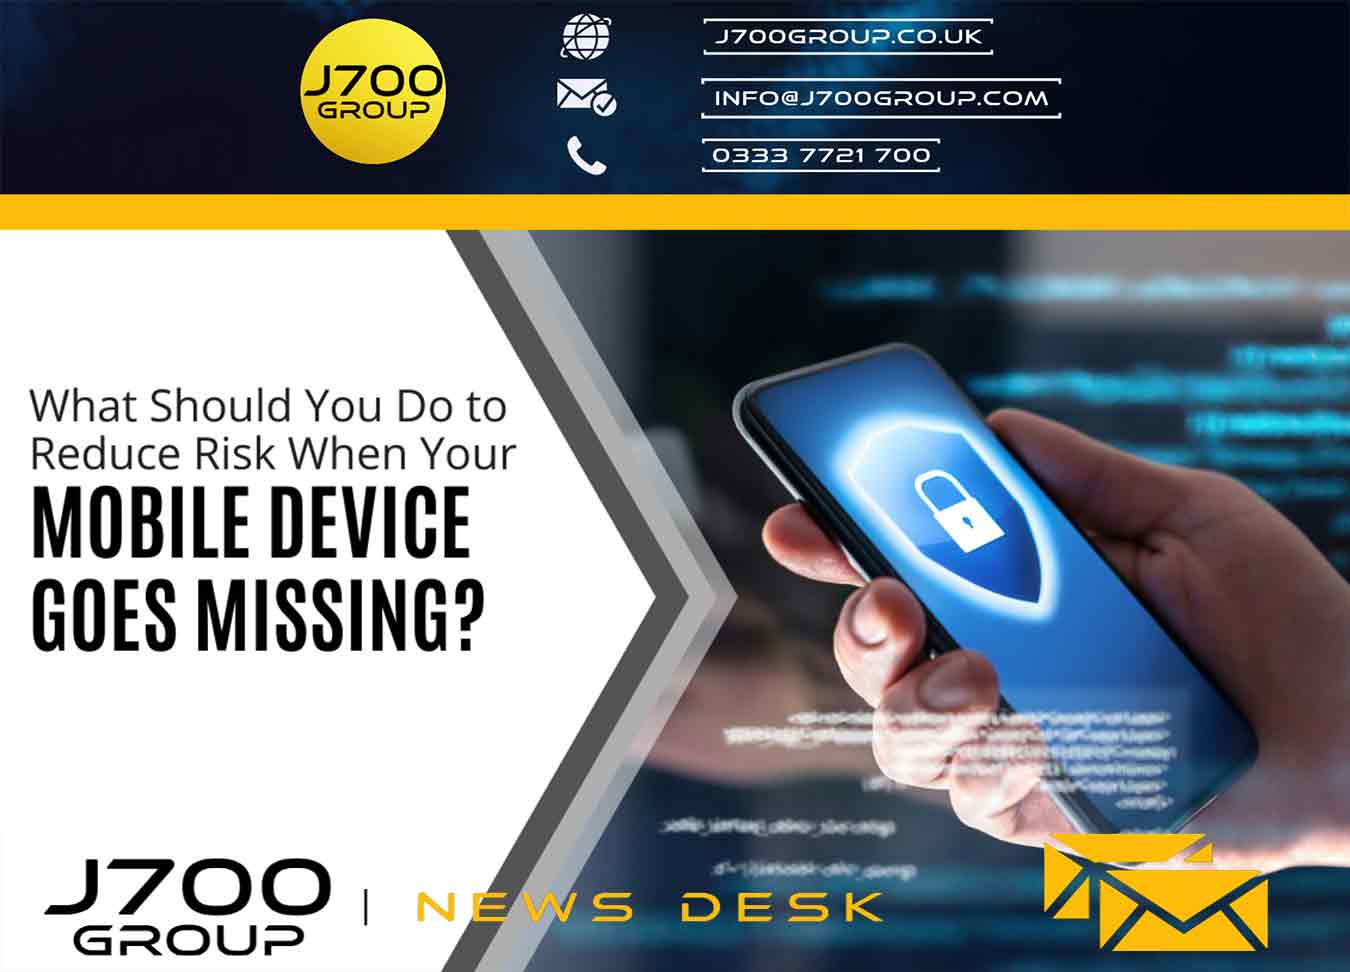 How To Reduce The Risk When Your Mobile Device Goes Missing?